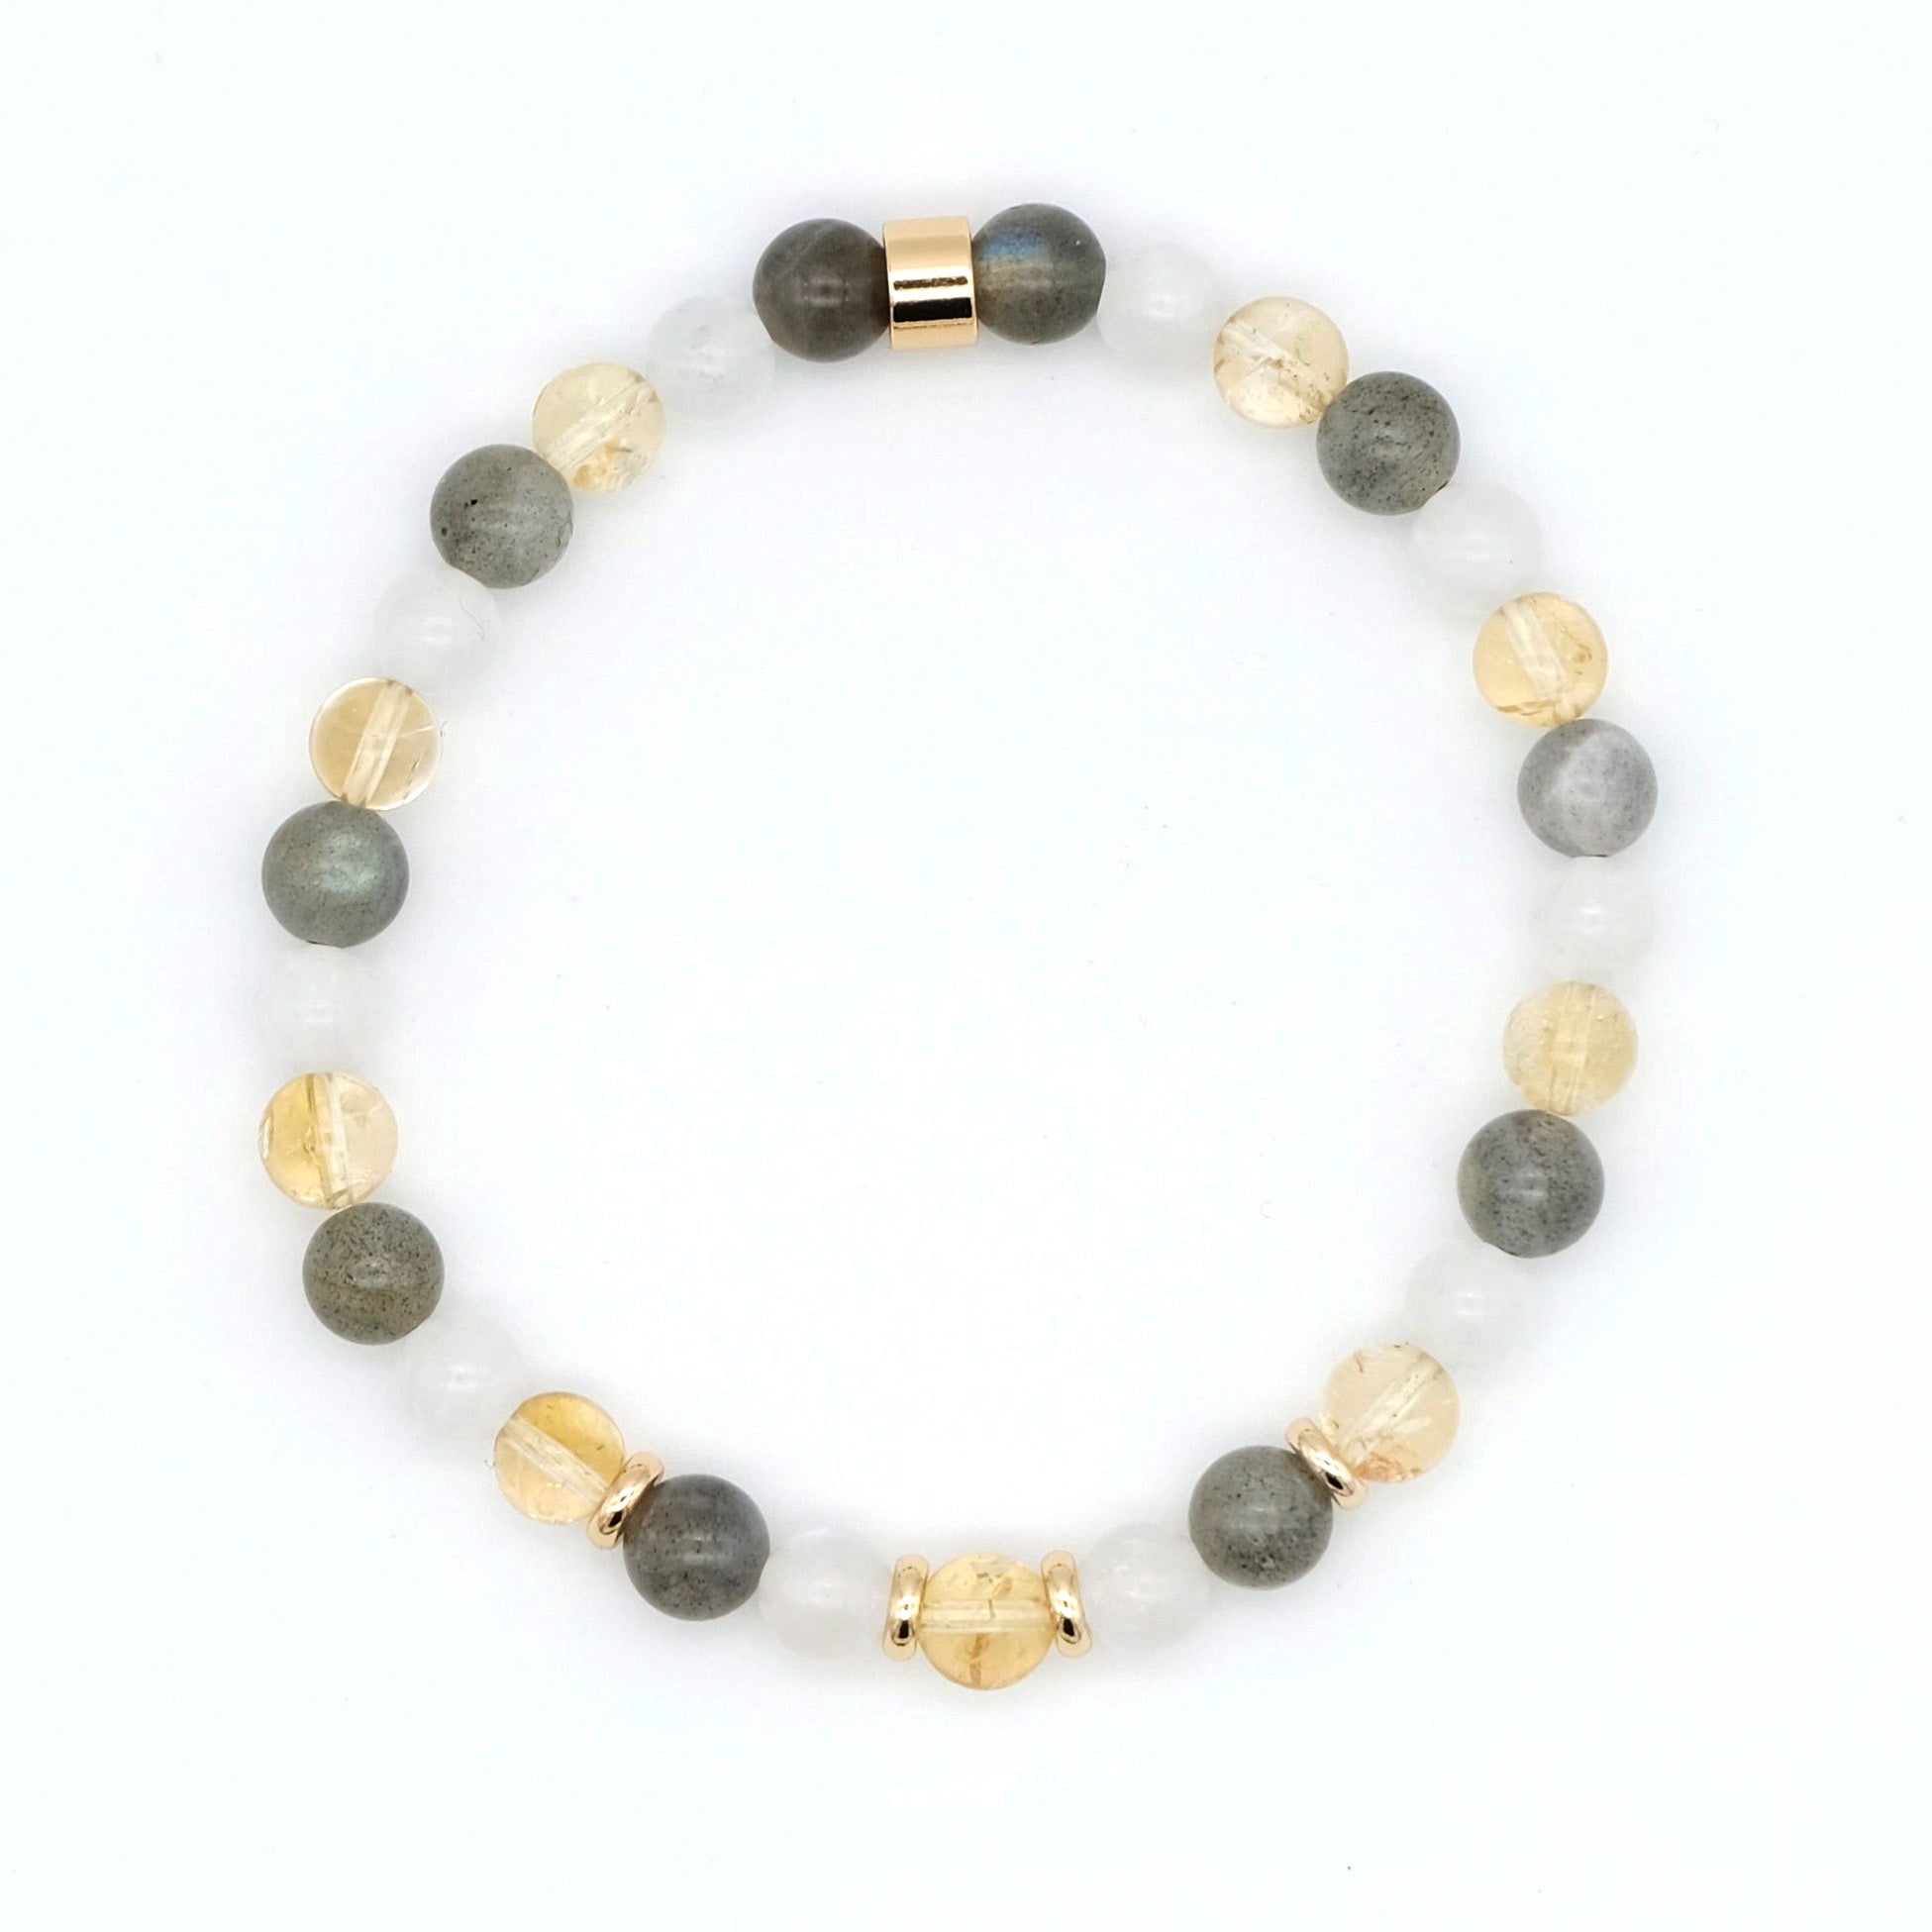 A citrine, labradorite and moonstone gemstone bracelet in 6mm beads with gold accessories from above